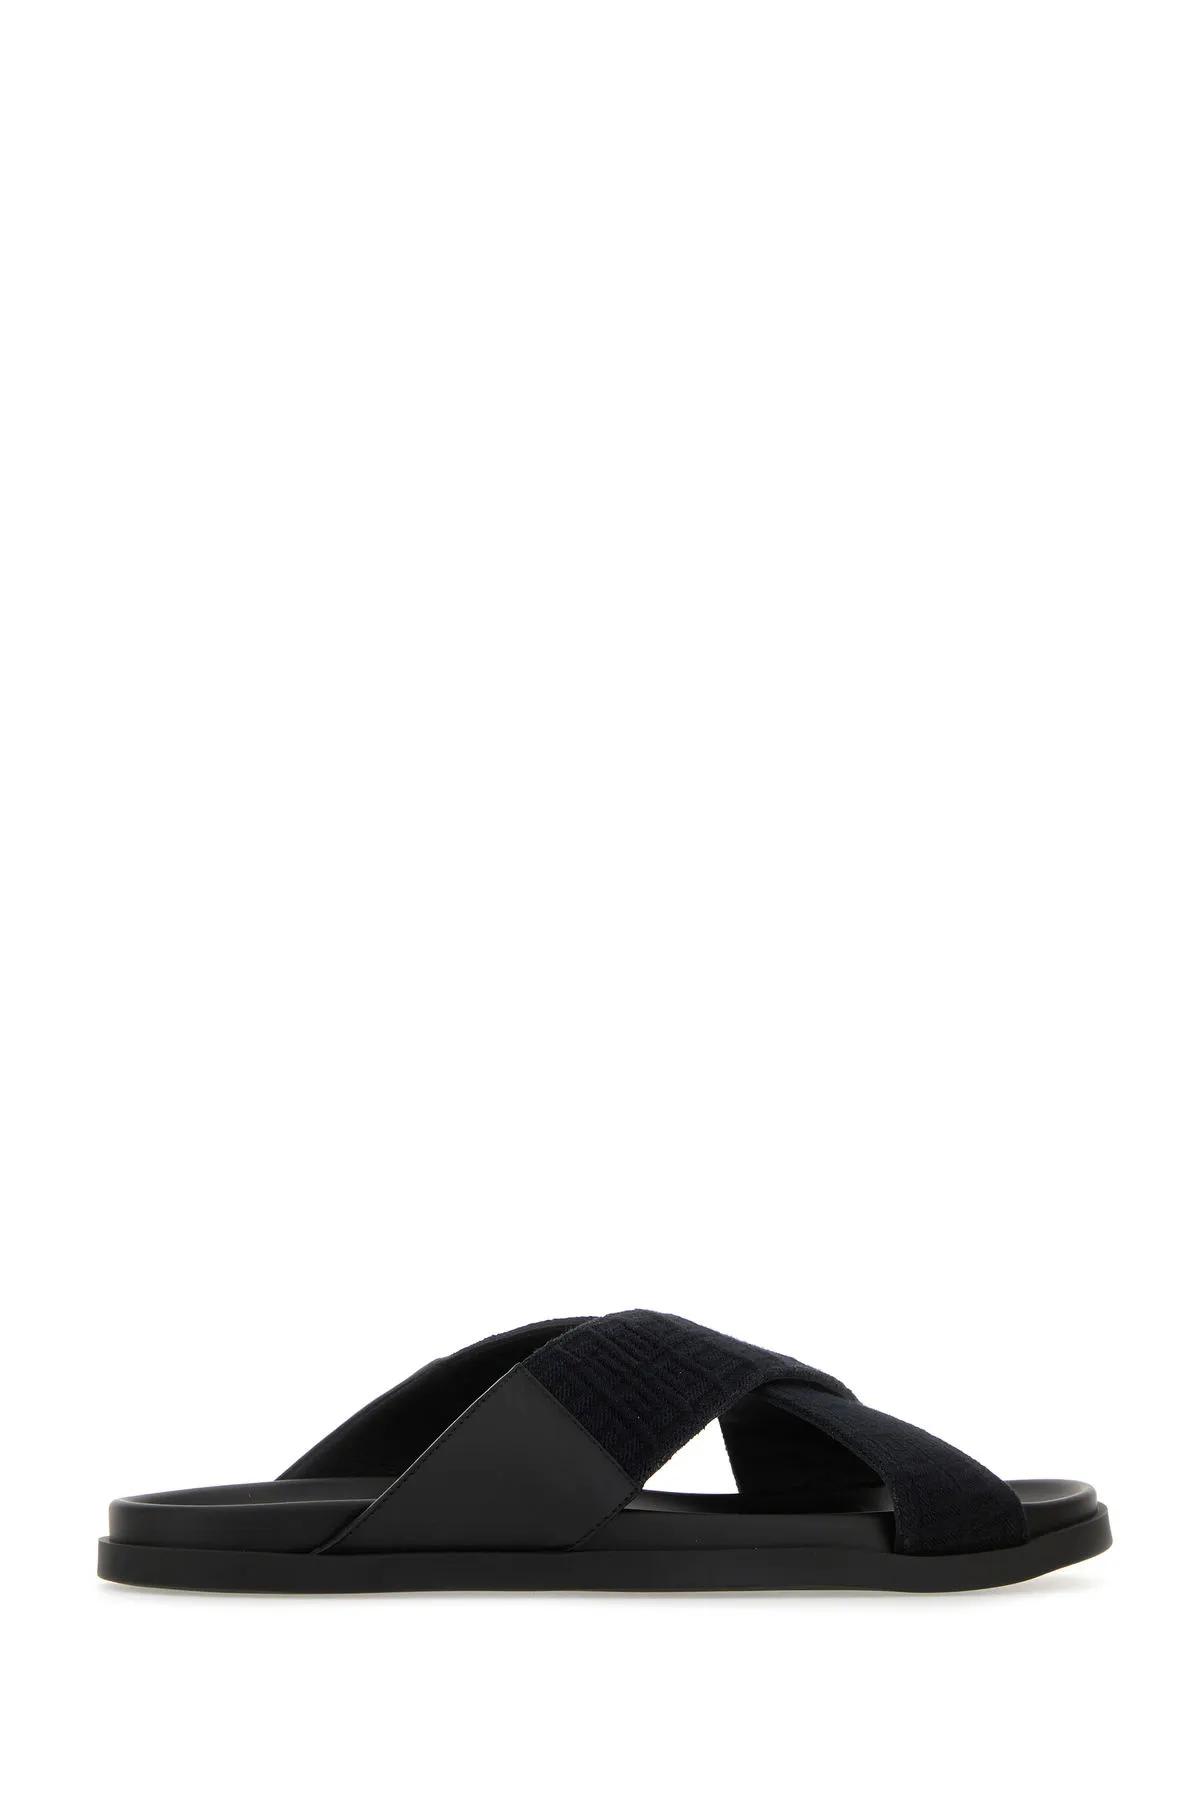 Shop Givenchy Black Leather And Cotton Slippers